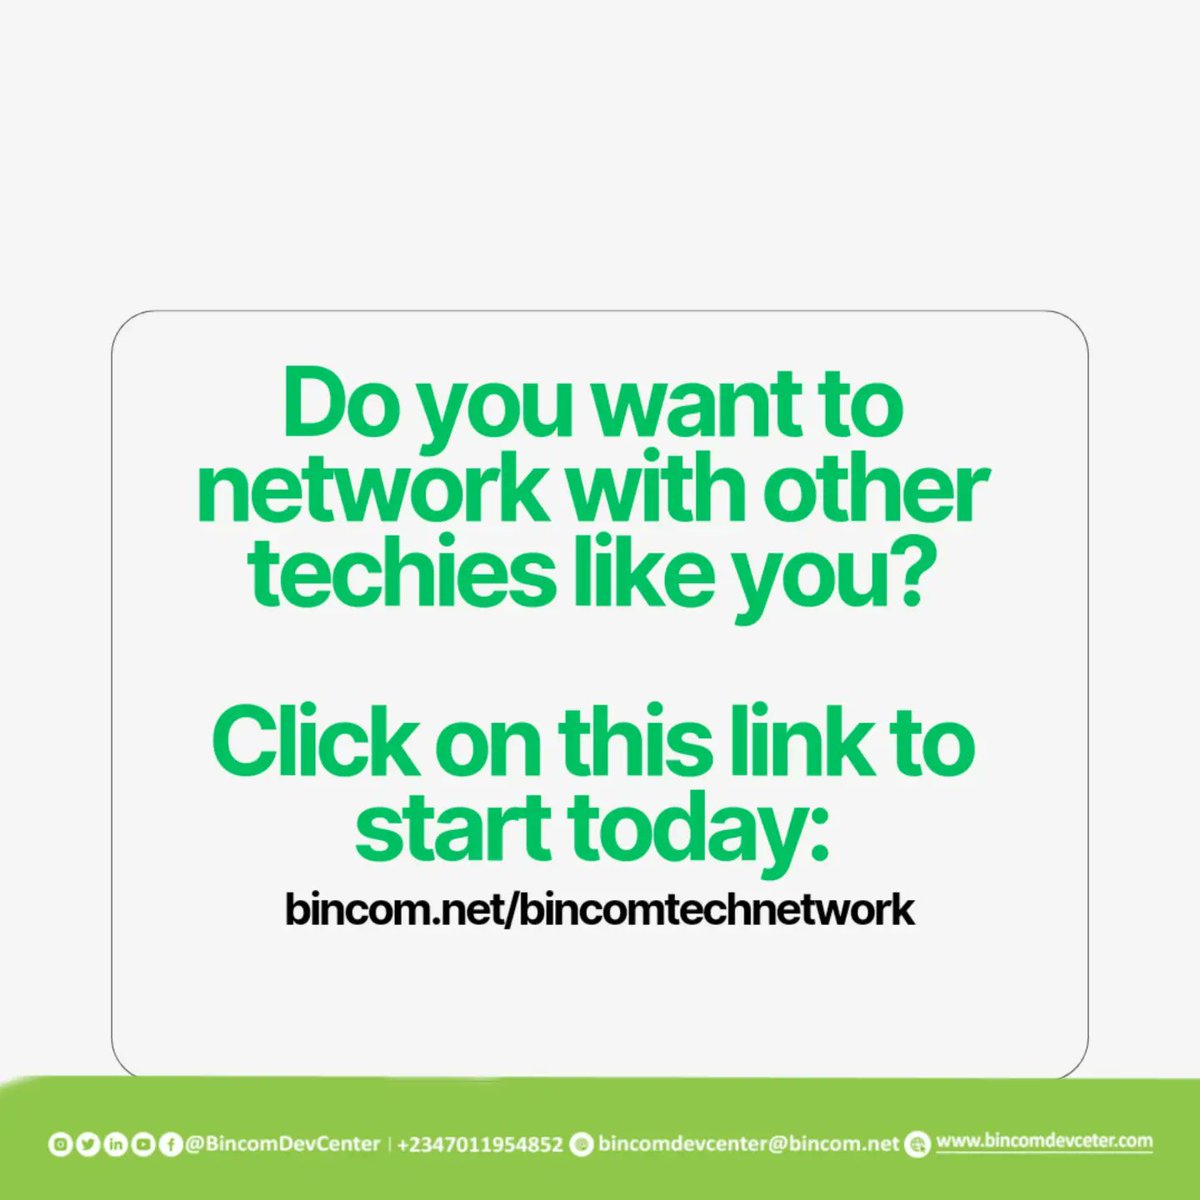 Embrace the power of networking and watch your career soar to new heights!

bincom.net/bincomtechnetw…

#NetworkingMatters
#BusinessNetworking
#DigitalConnections
#NetworkingGoals
#RelationshipBuilding
#NetworkingNinja
#NetworkingCommunity
#NetworkingForSuccess